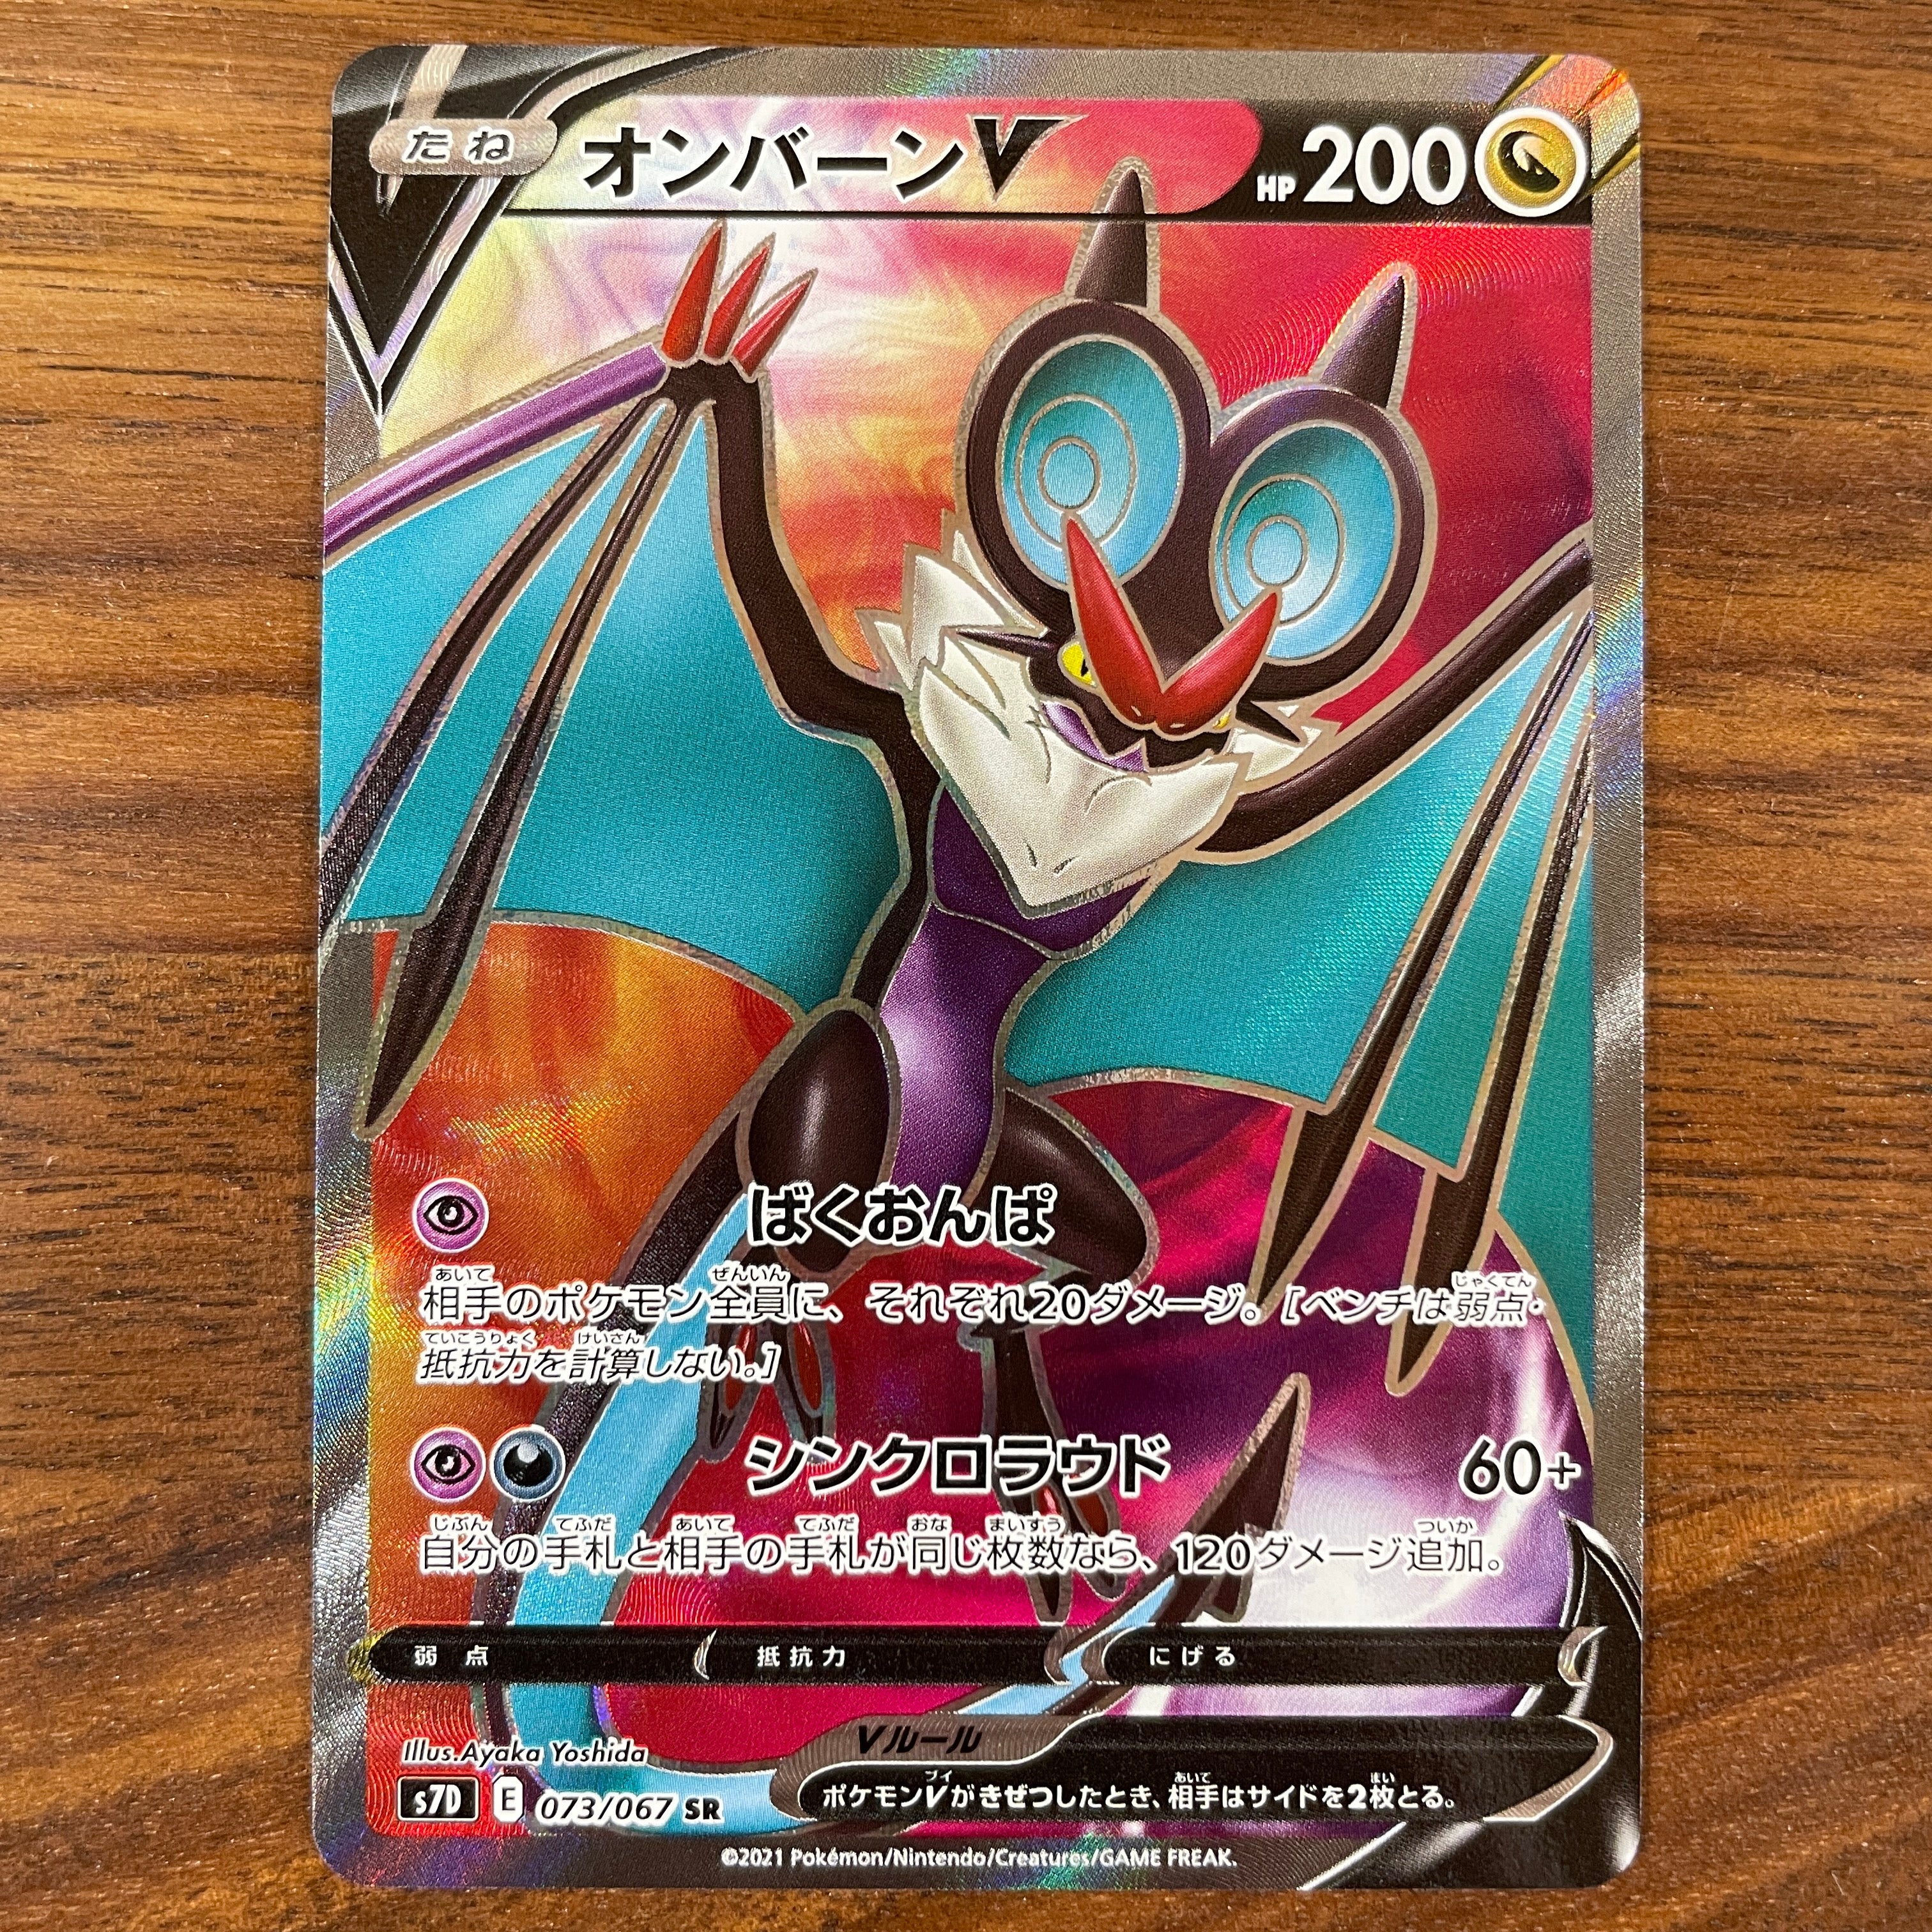 POKÉMON CARD GAME Sword & Shield Expansion pack ｢Skyscraping Perfect｣  POKÉMON CARD GAME S7D 073/069 Super Rare card  Noivern V